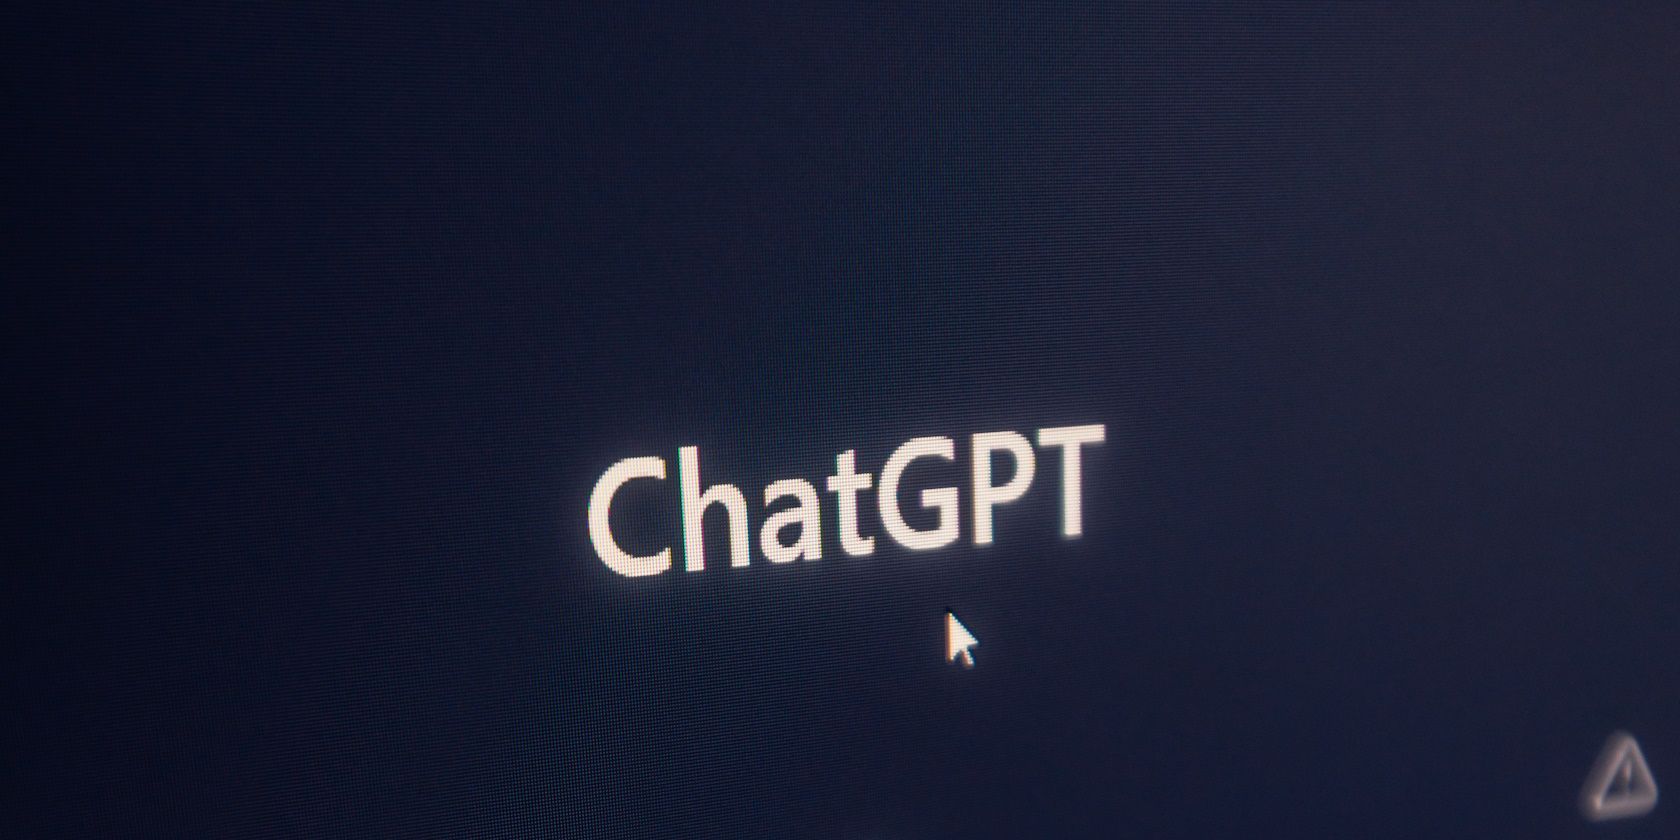 Black background featuring ChatGPT logo